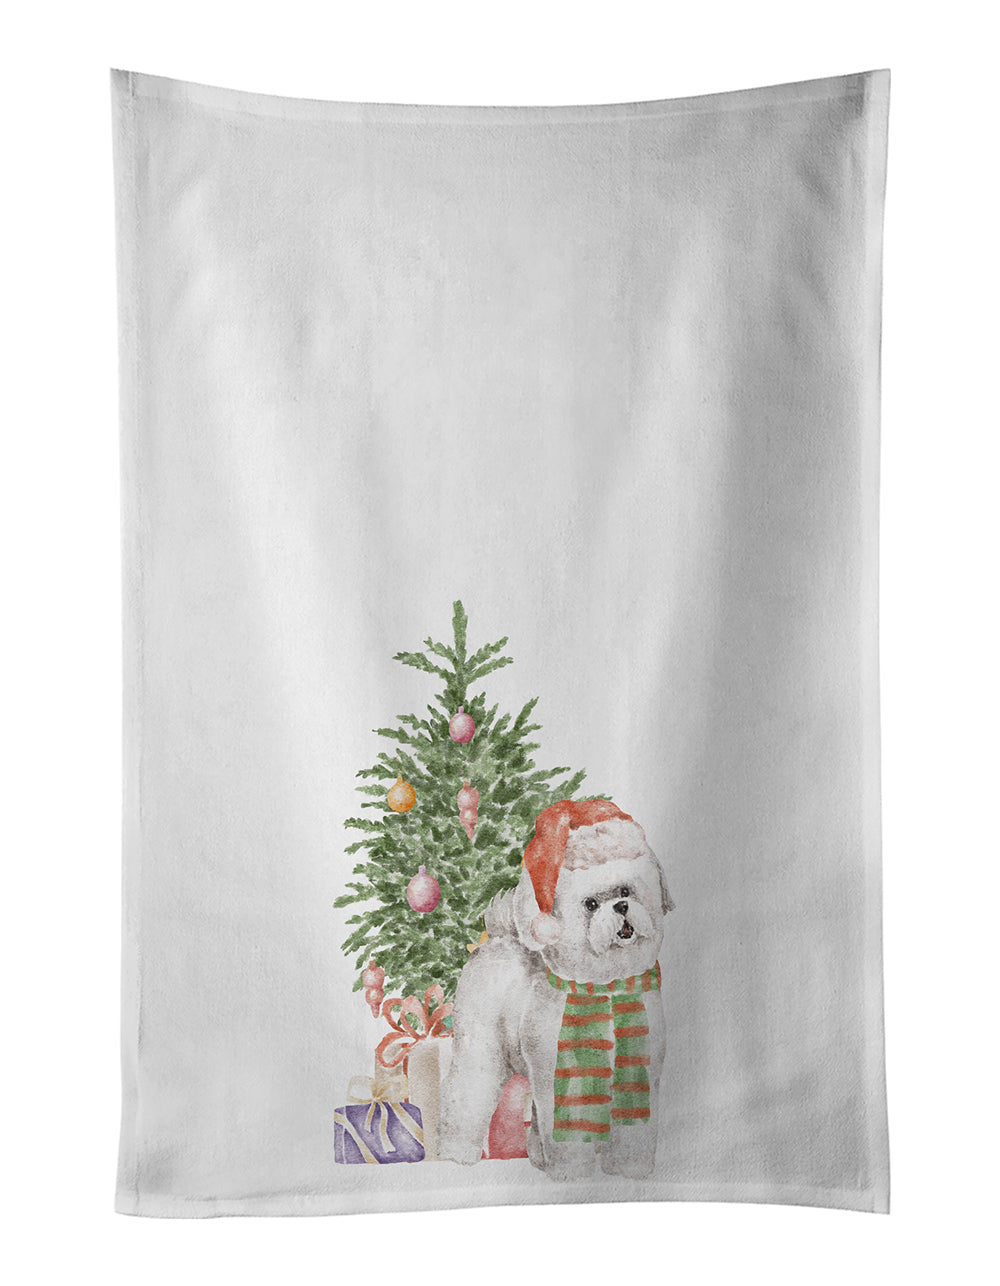 Buy this Bichon Frise Red Hat Christmas Presents and Tree White Kitchen Towel Set of 2